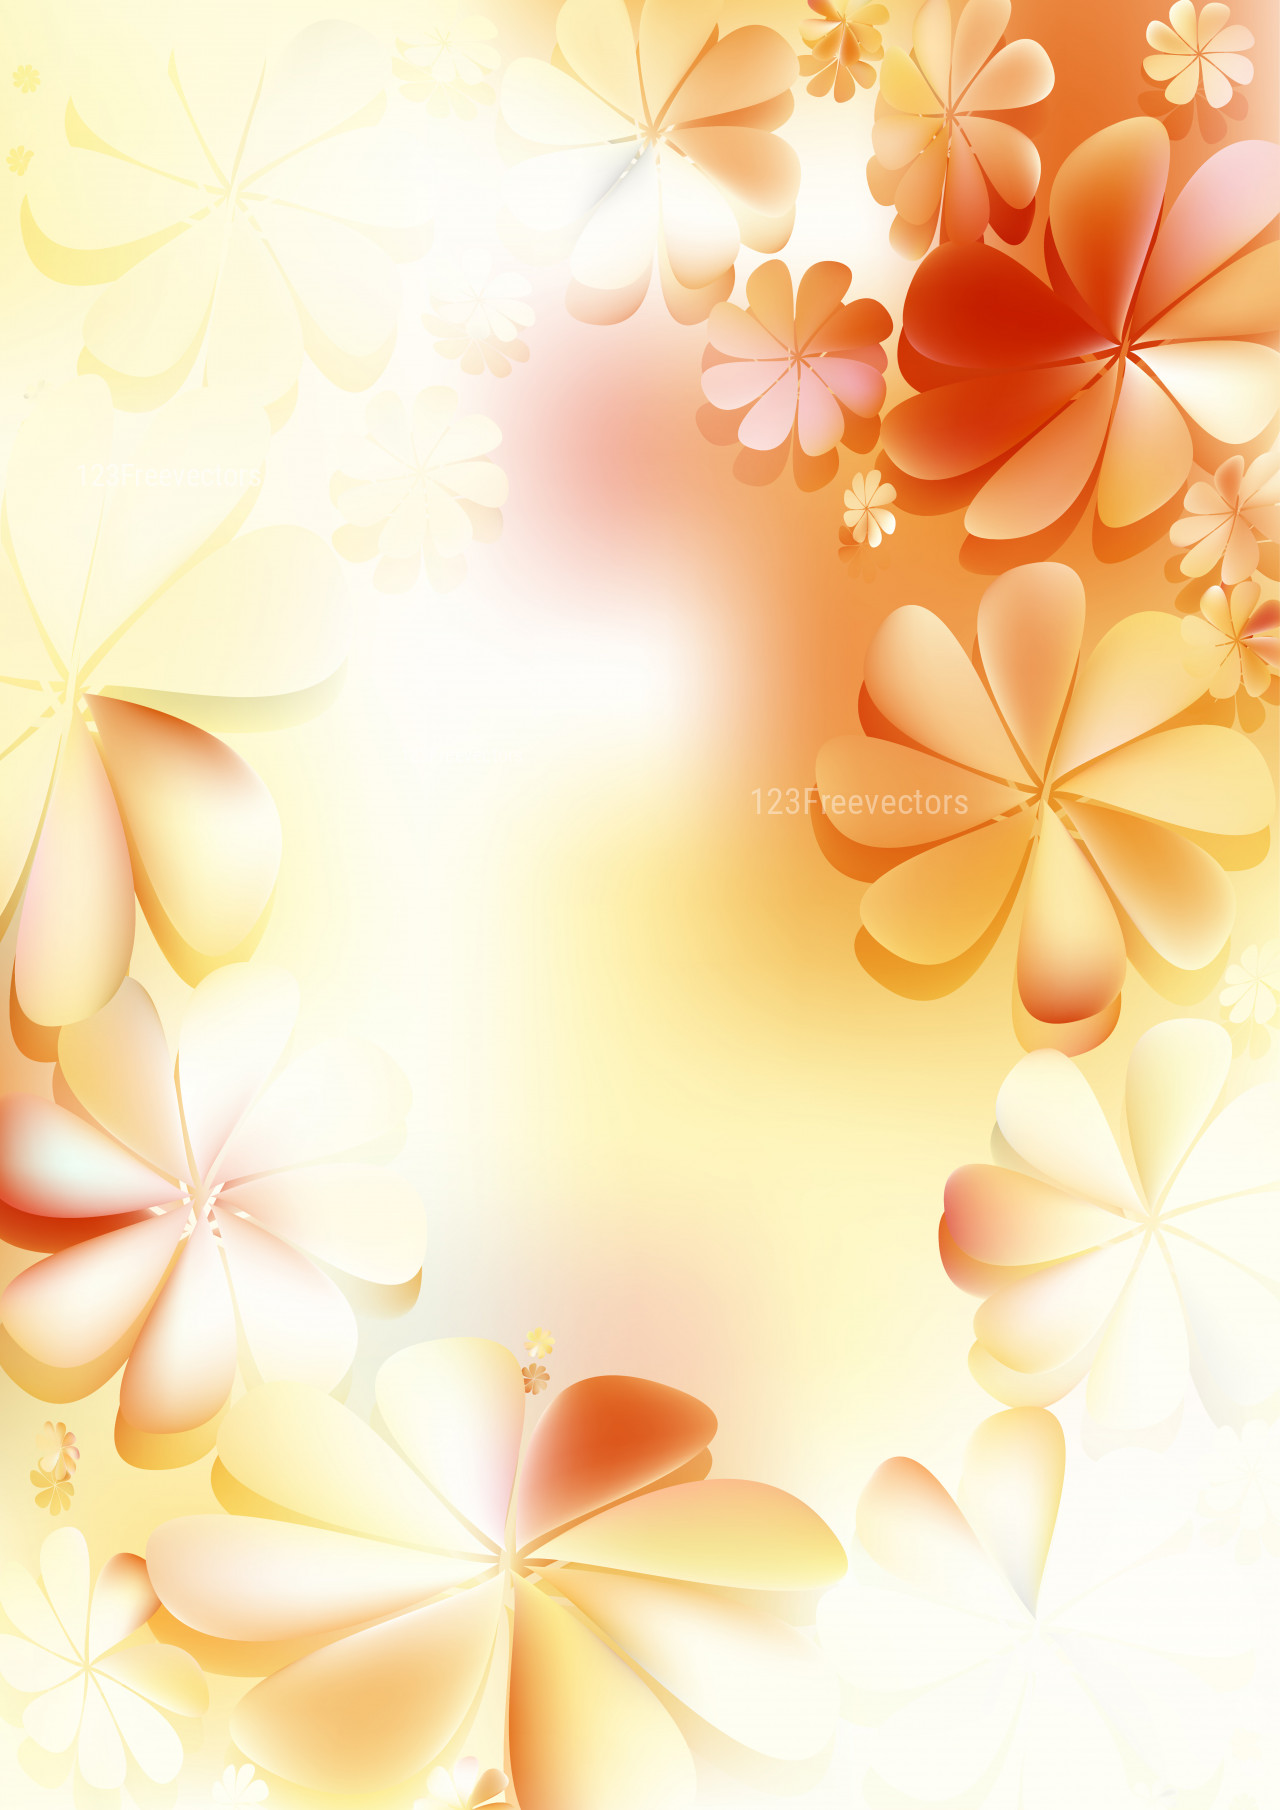 Orange and White Floral Background Graphic